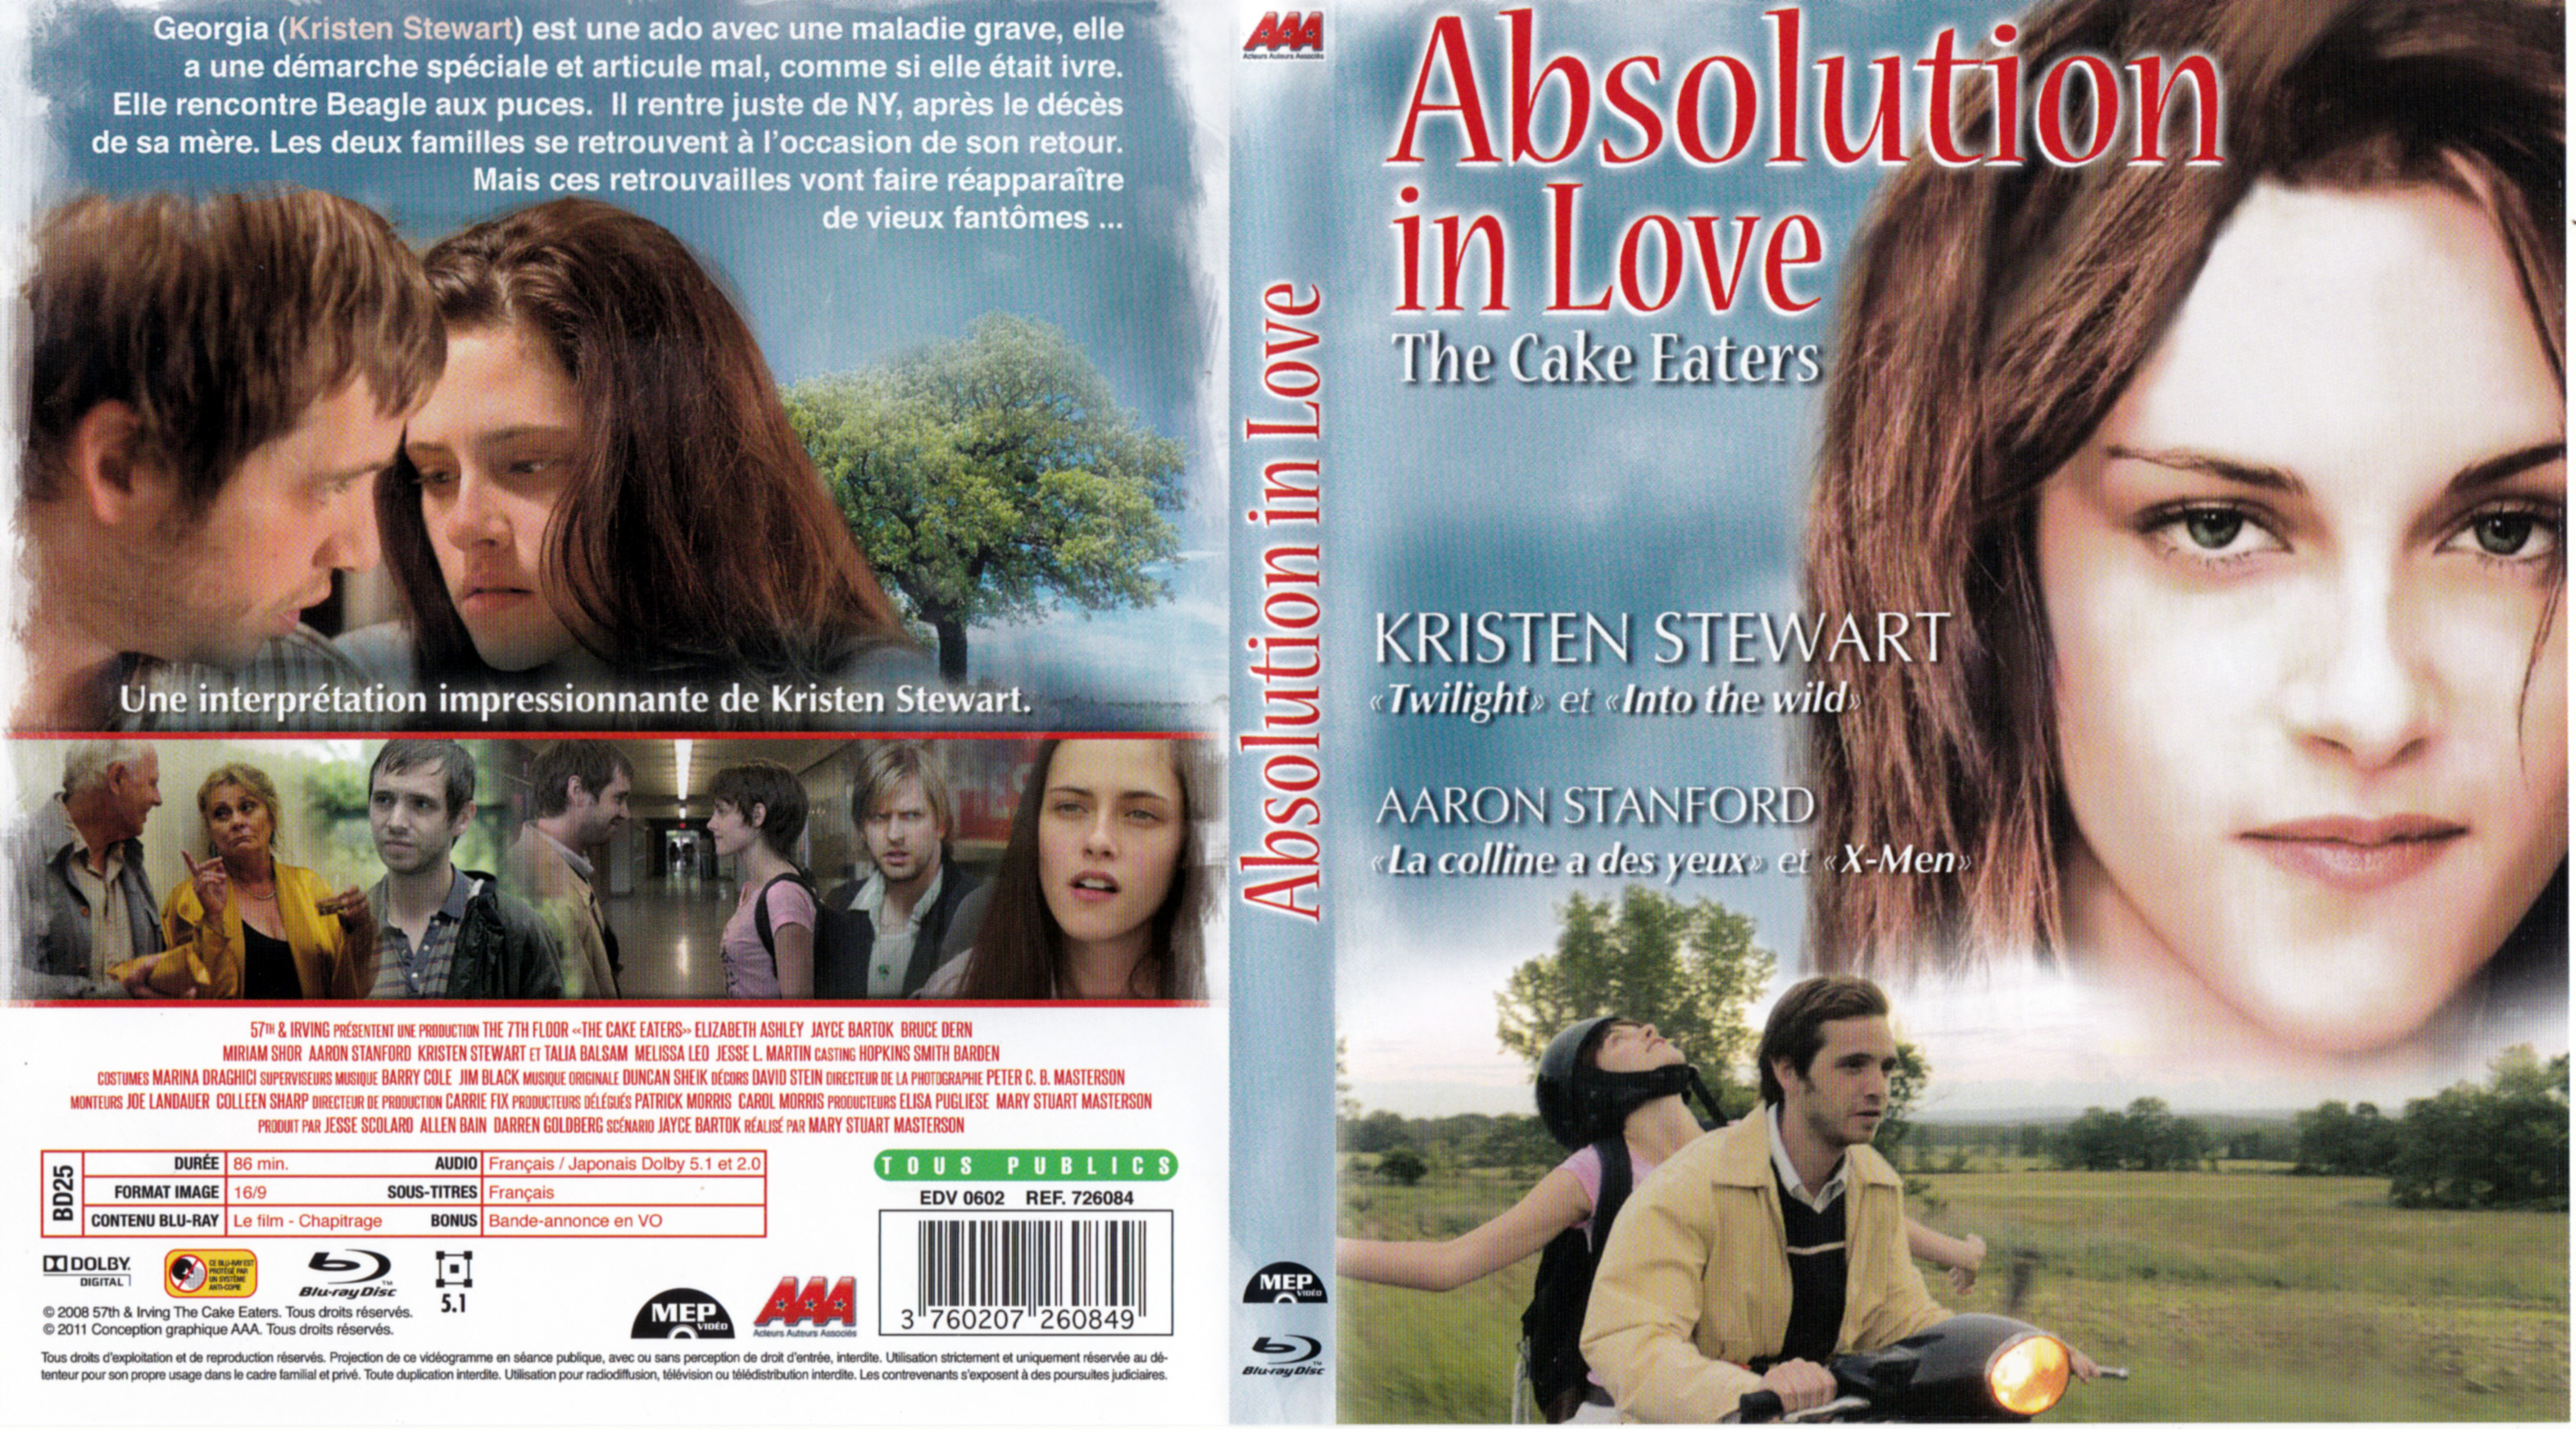 Jaquette DVD The Cake Eaters - Absolution in love (BLU-RAY)